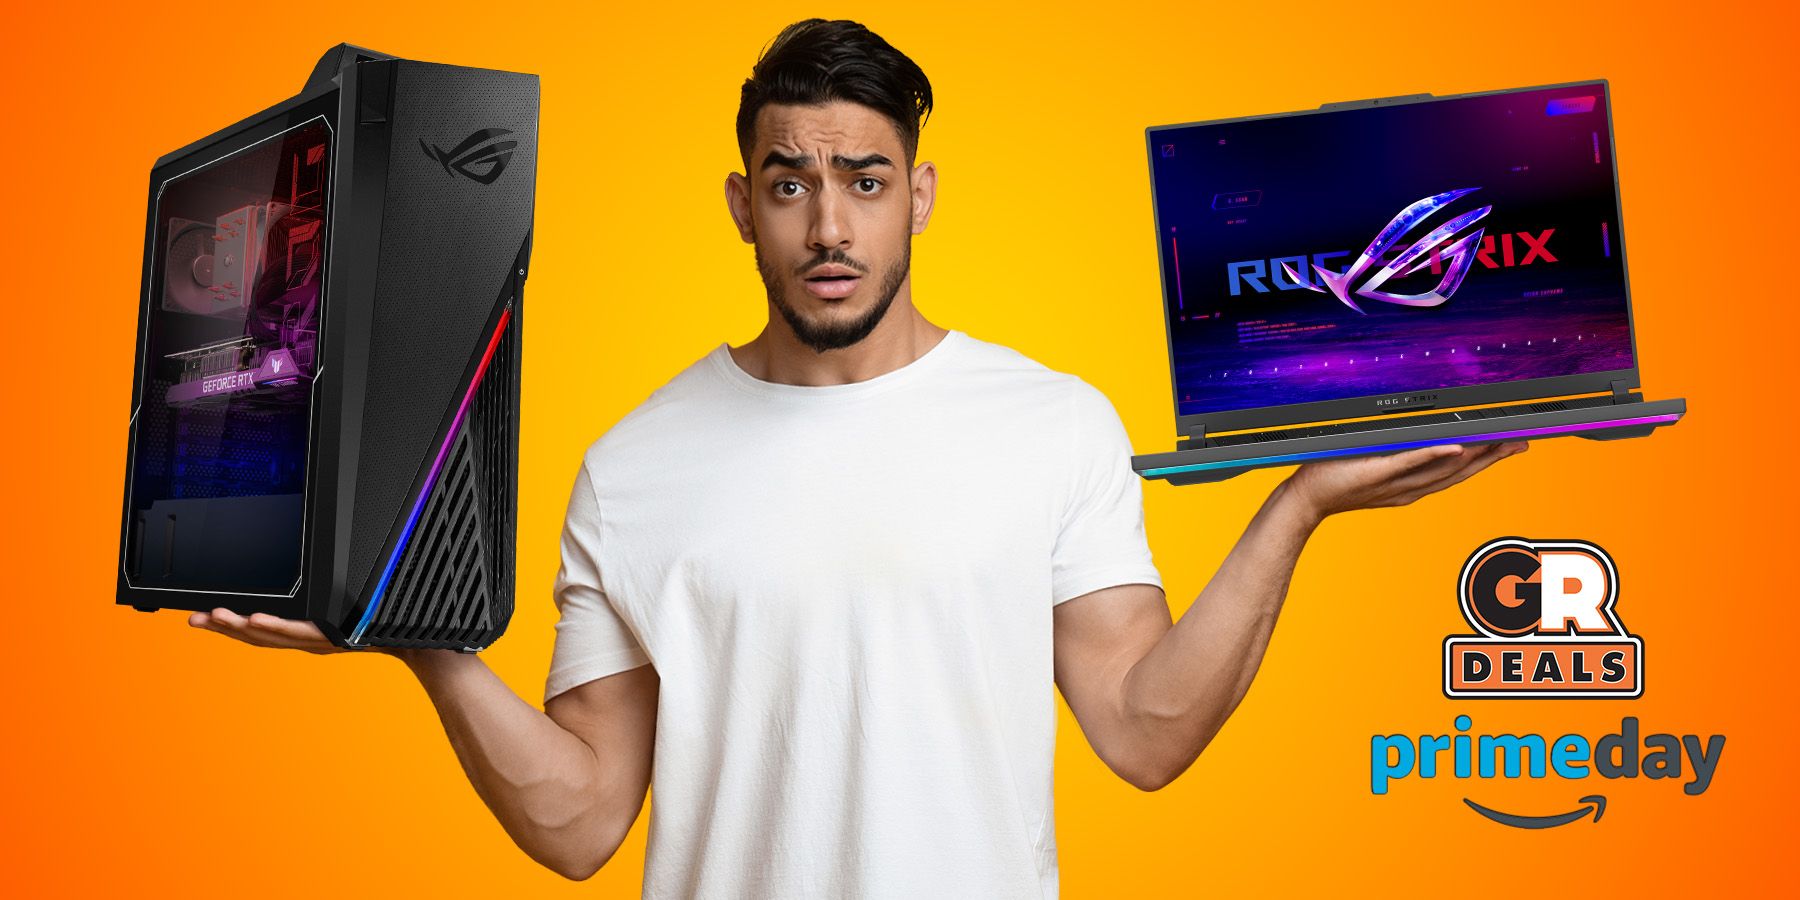 Here Are Prime Day's Best Gaming PC Deals on Laptops, Desktops and GPUs -  IGN